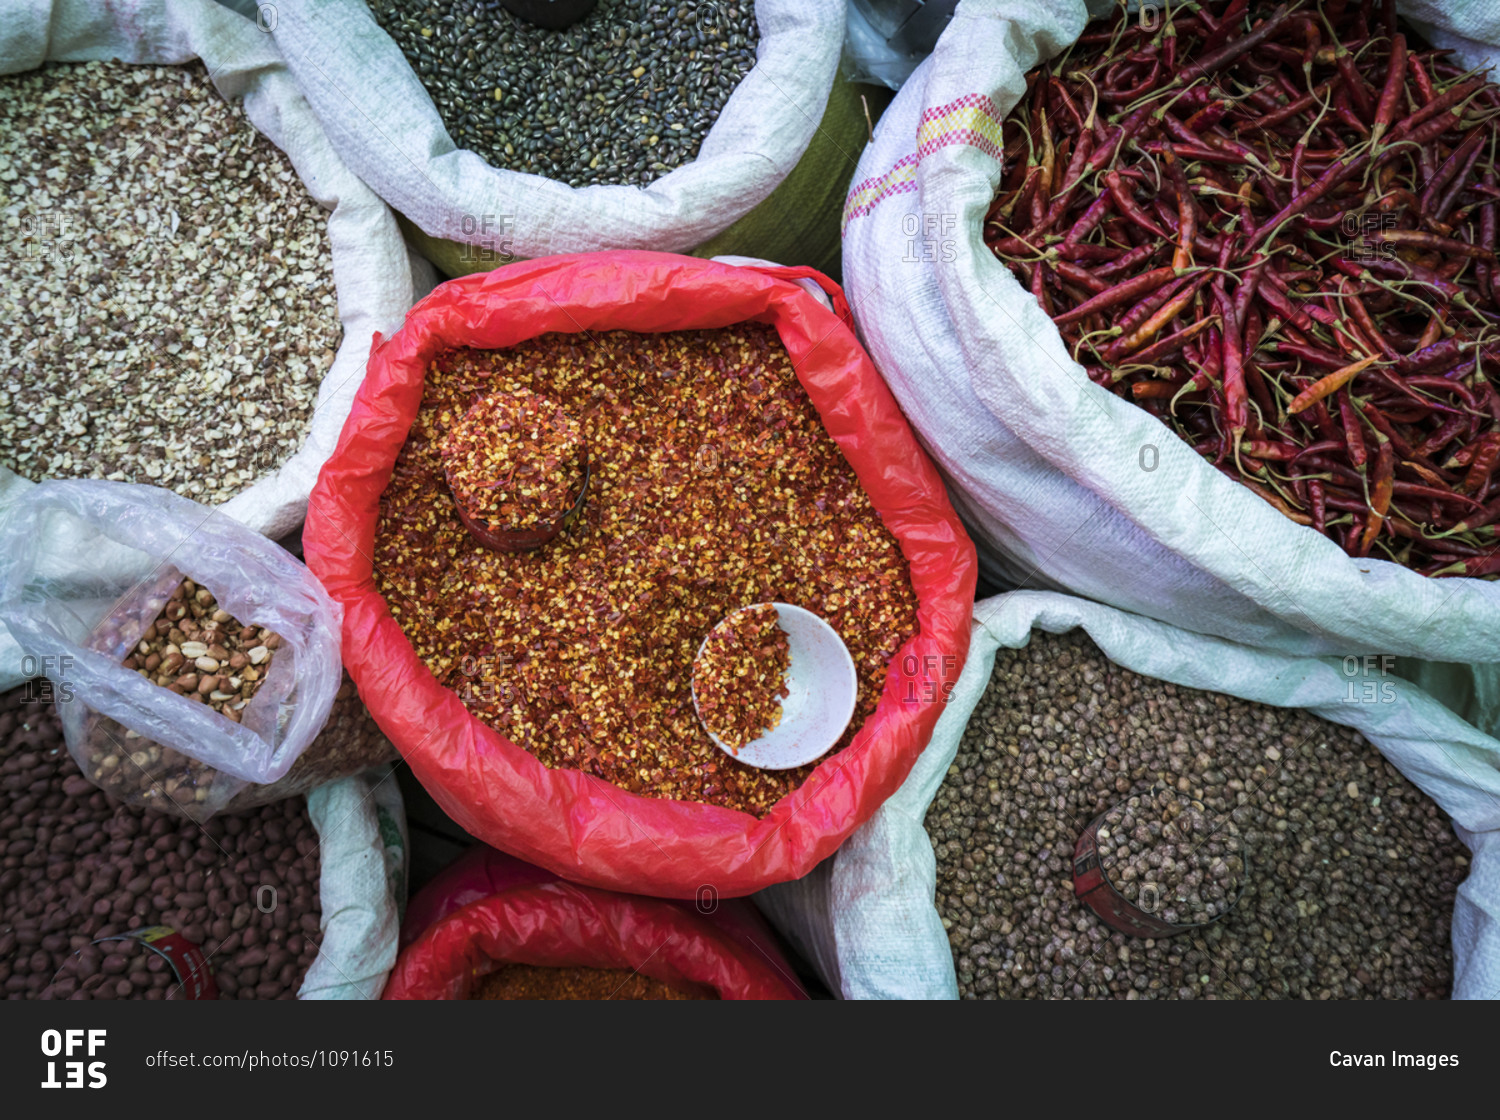 Overhead view of seeds and red chili peppers for sale at market, nyaungshwe, lake inle, myanmar